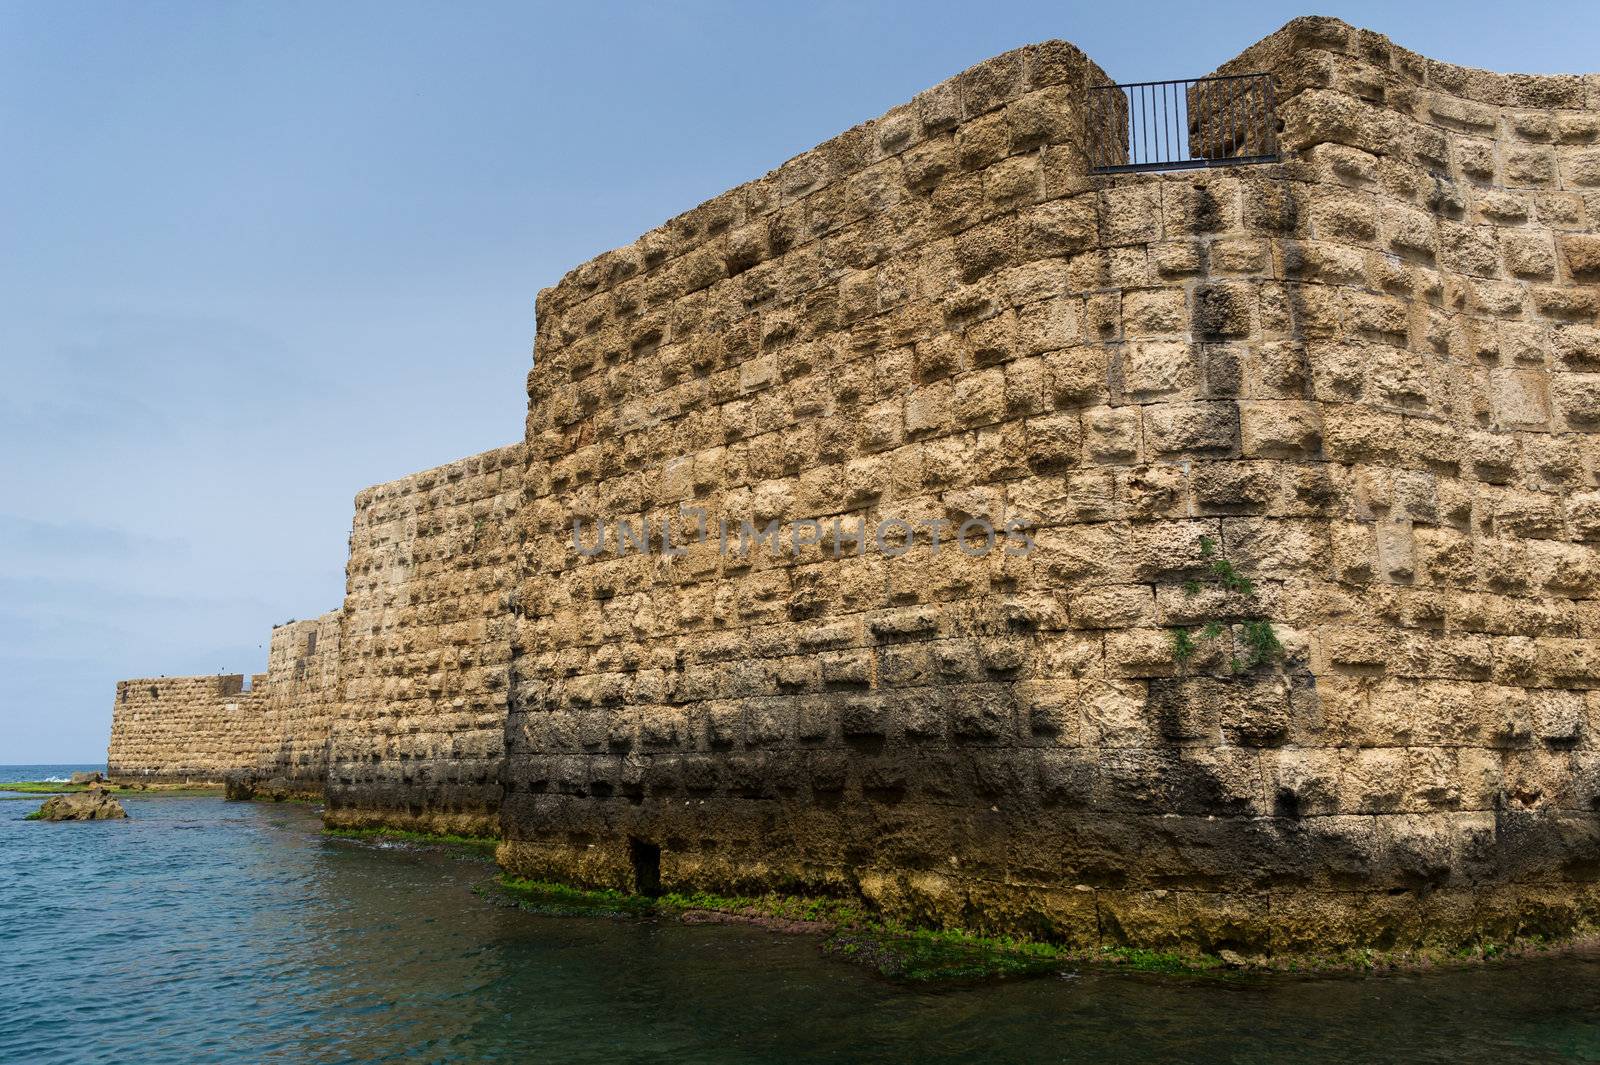 The view of historic sea walls in ancient Acre (Akko), Israel